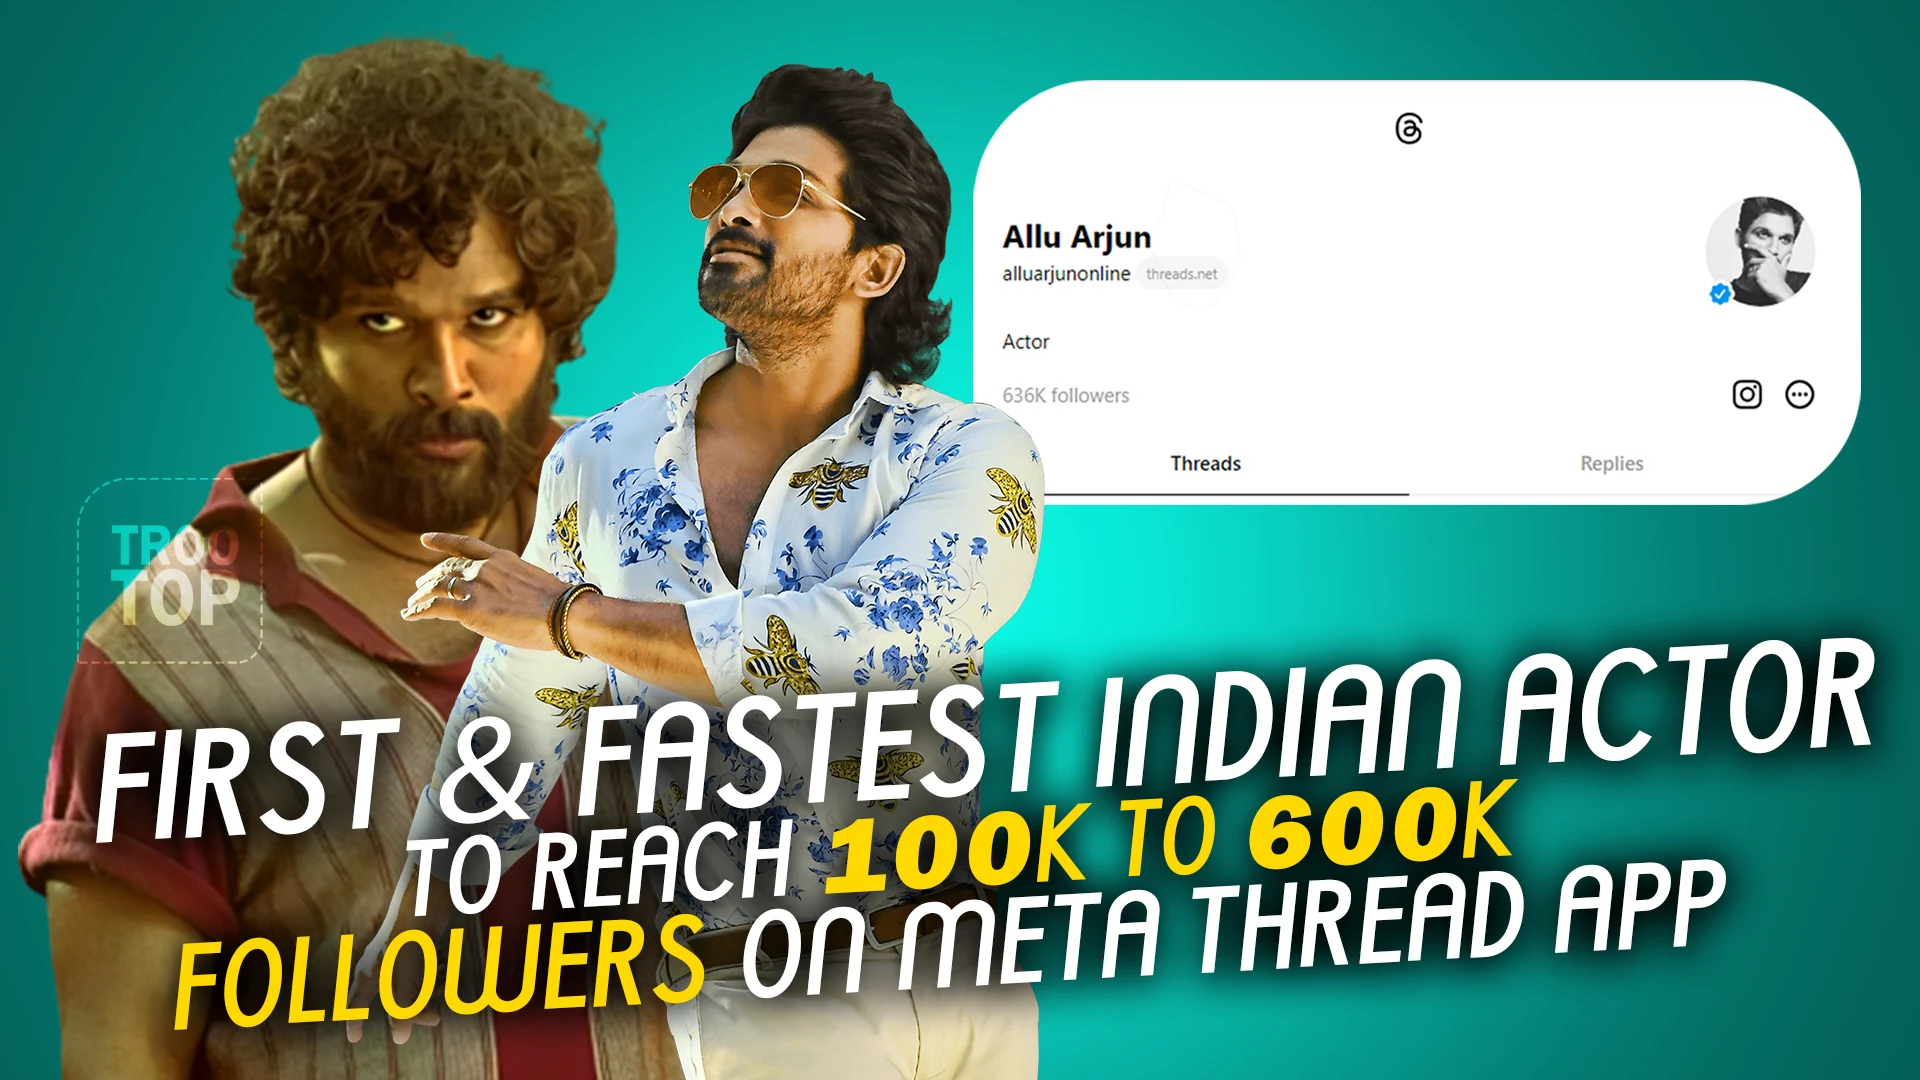 First and Fastest Indian Actor to reach 100K to 600K followers on meta thread app